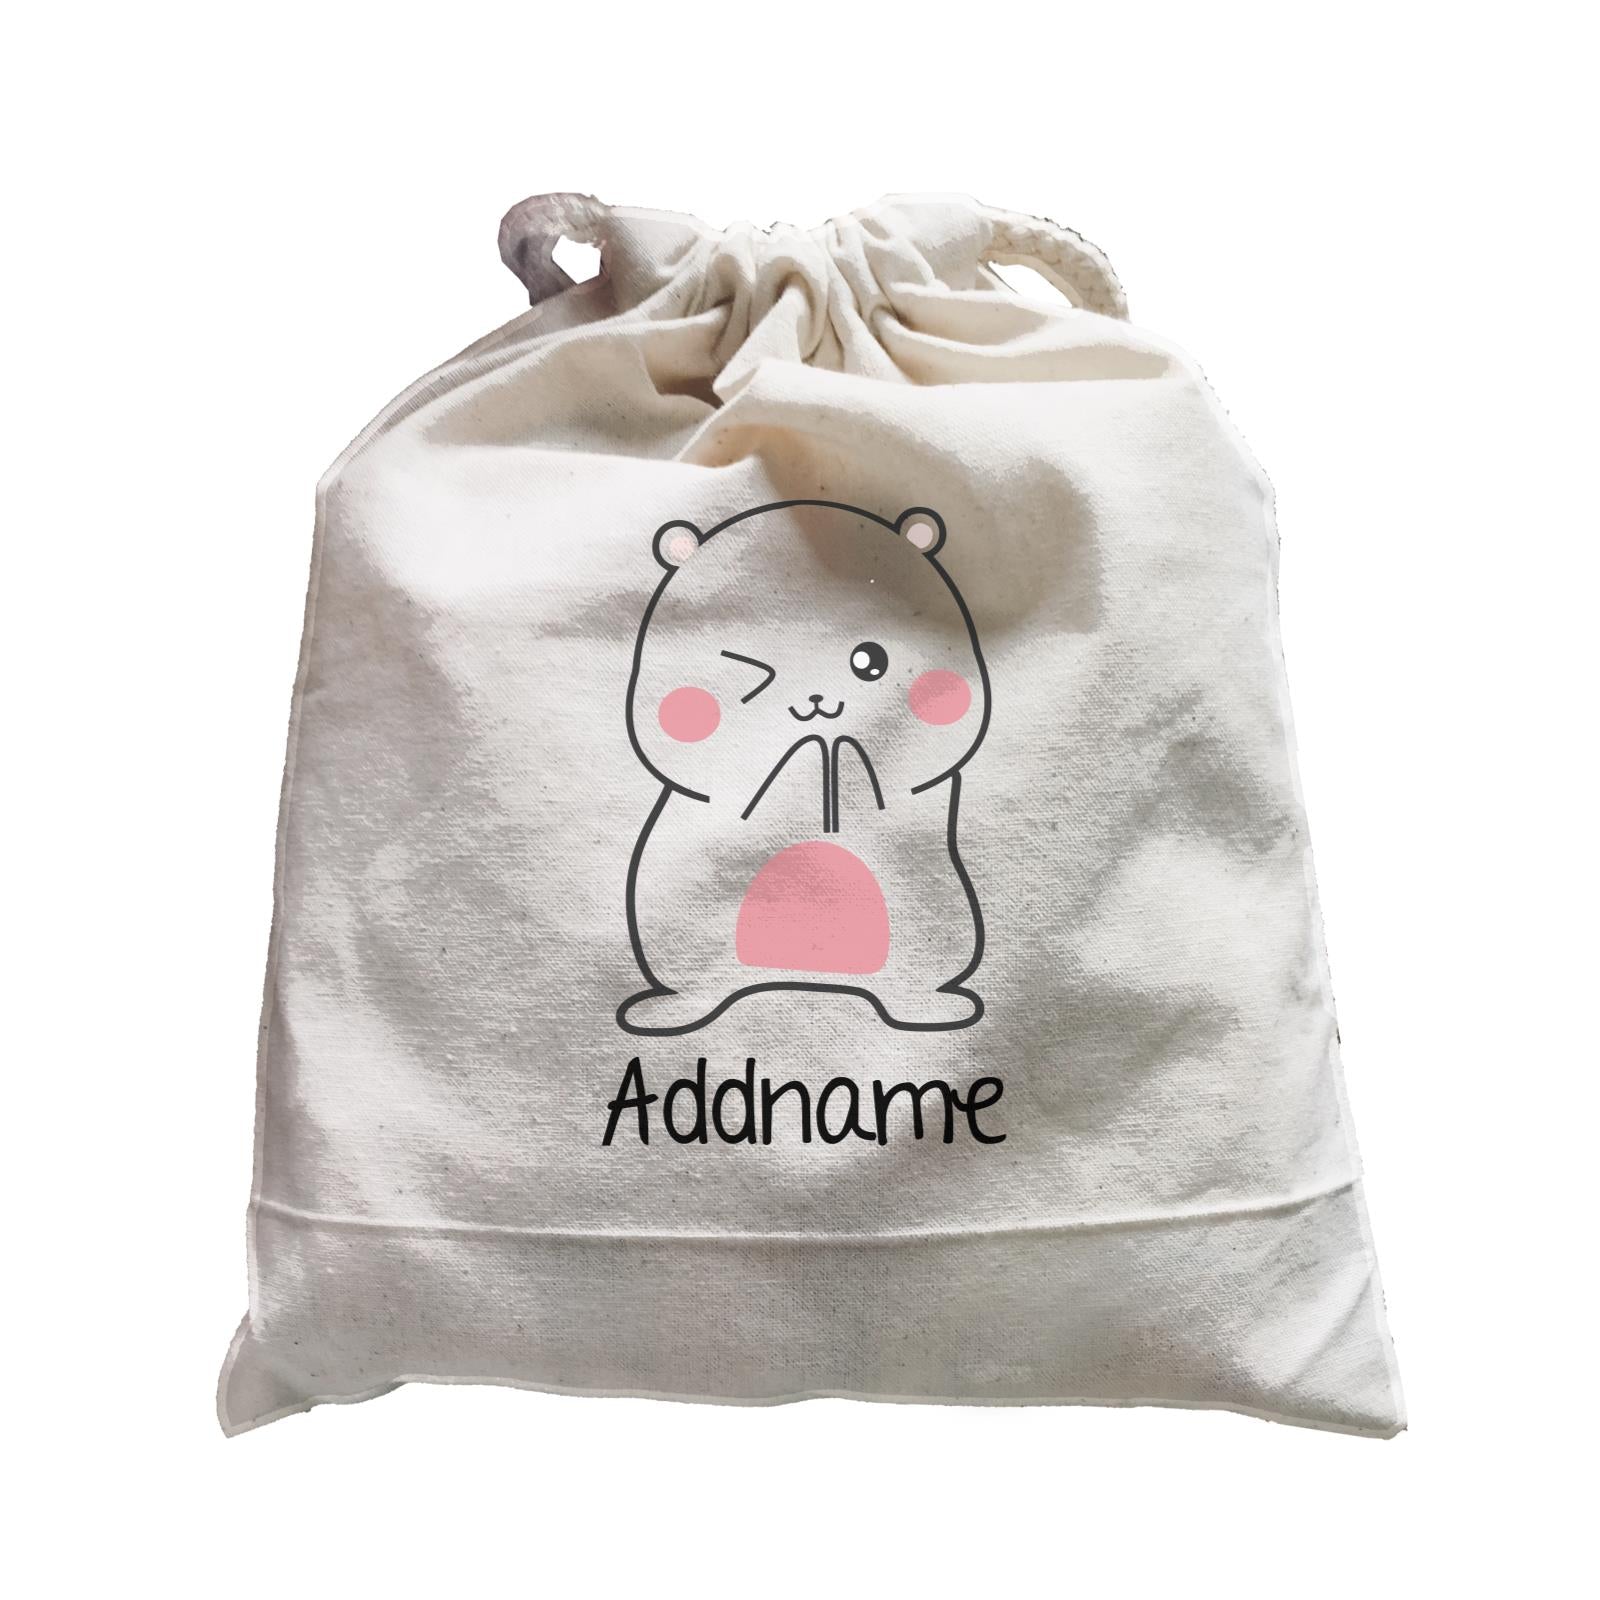 Cute Hamster Daddy Addname Satchel